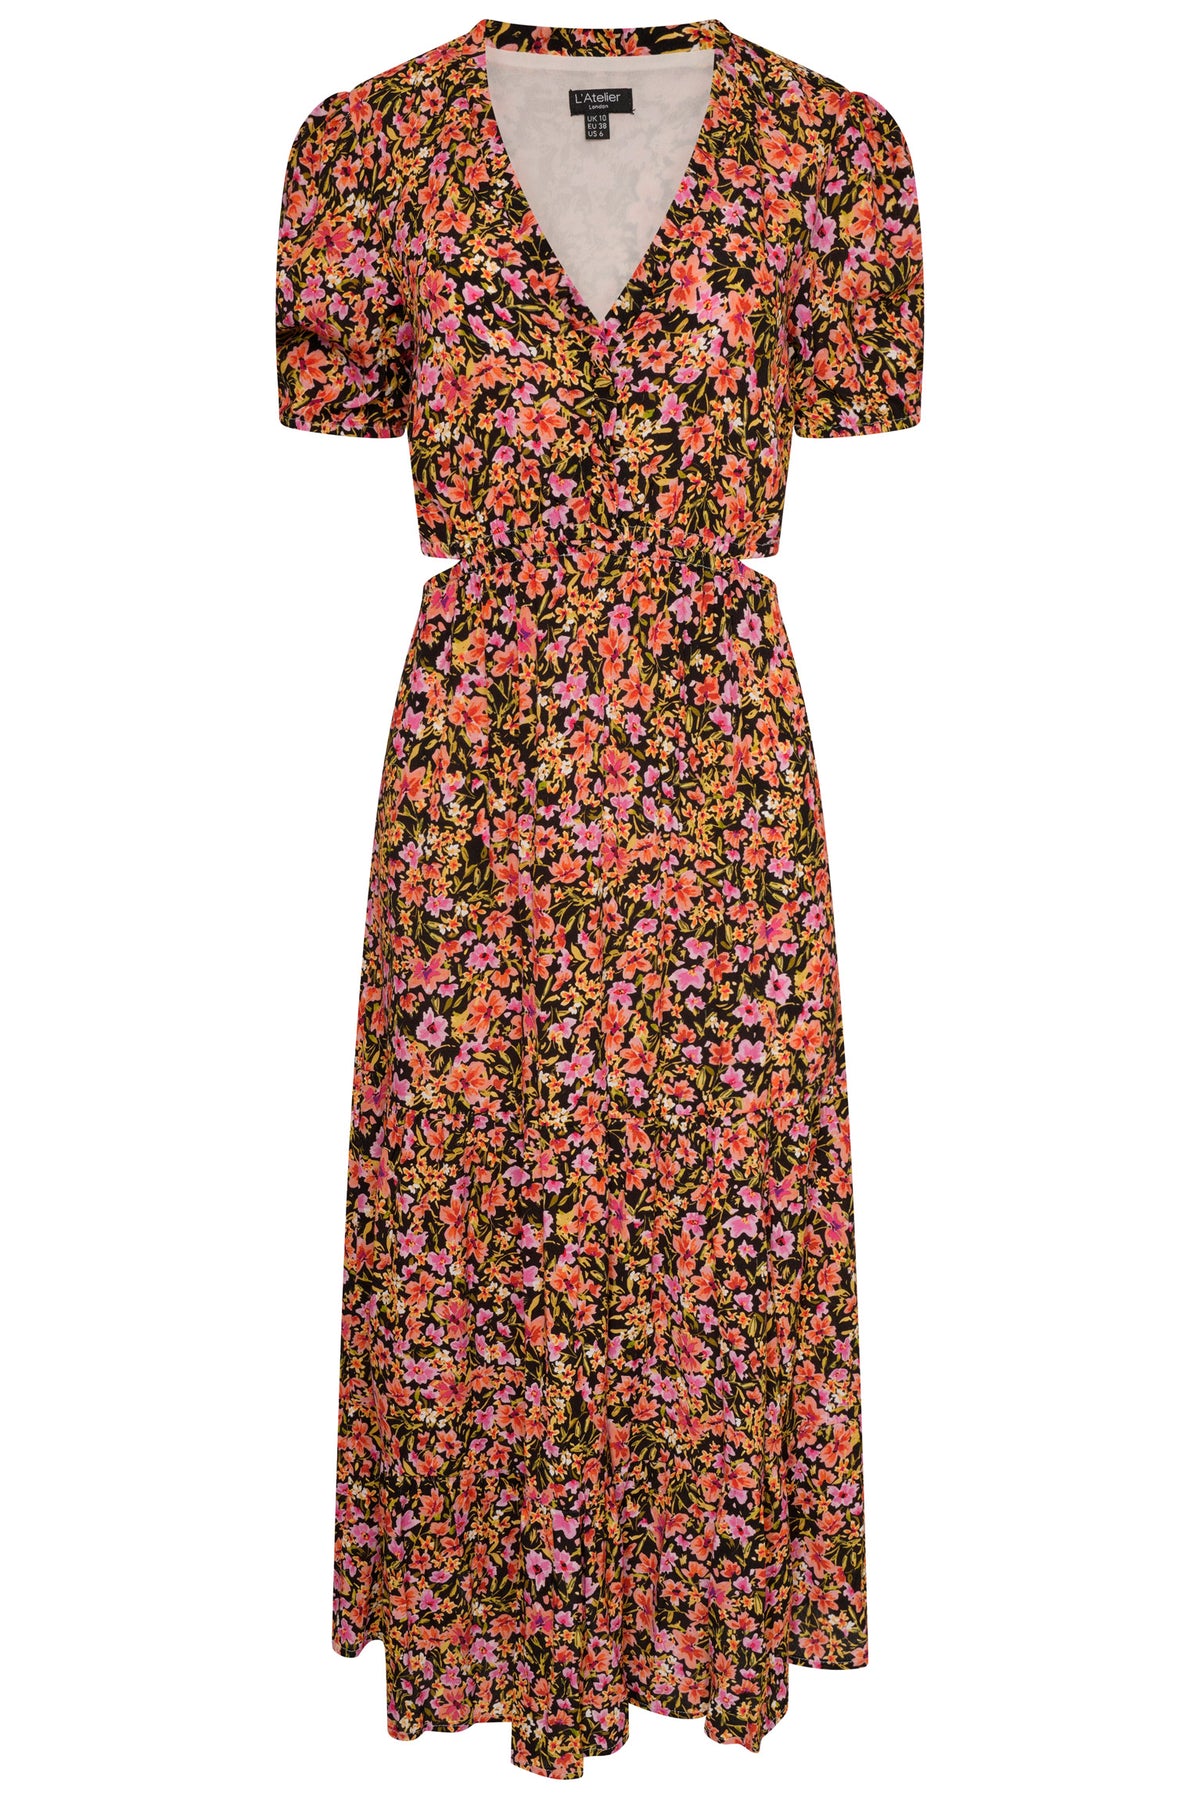 Carlotta Floral Midi Dress With Side Cut Outs